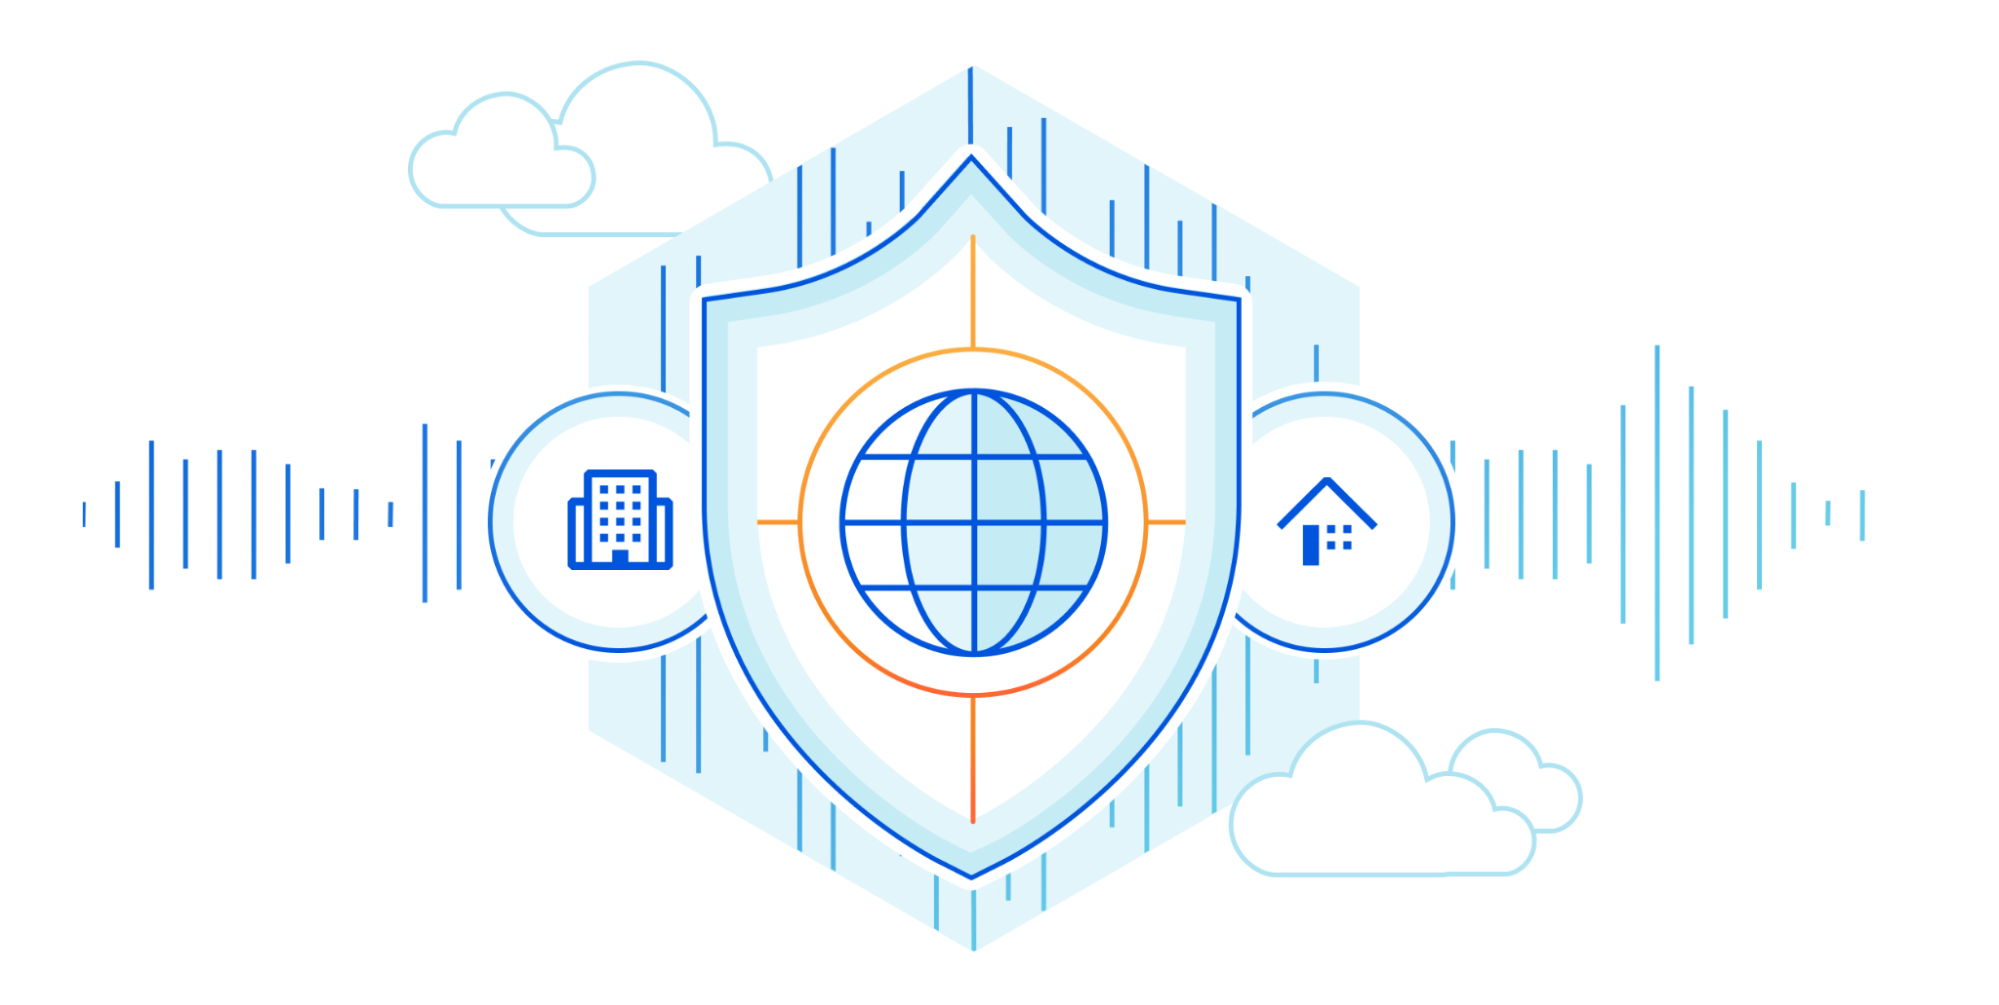 Secure by default: recommendations from the CISA’s newest guide, and how Cloudflare follows these principles to keep you secure